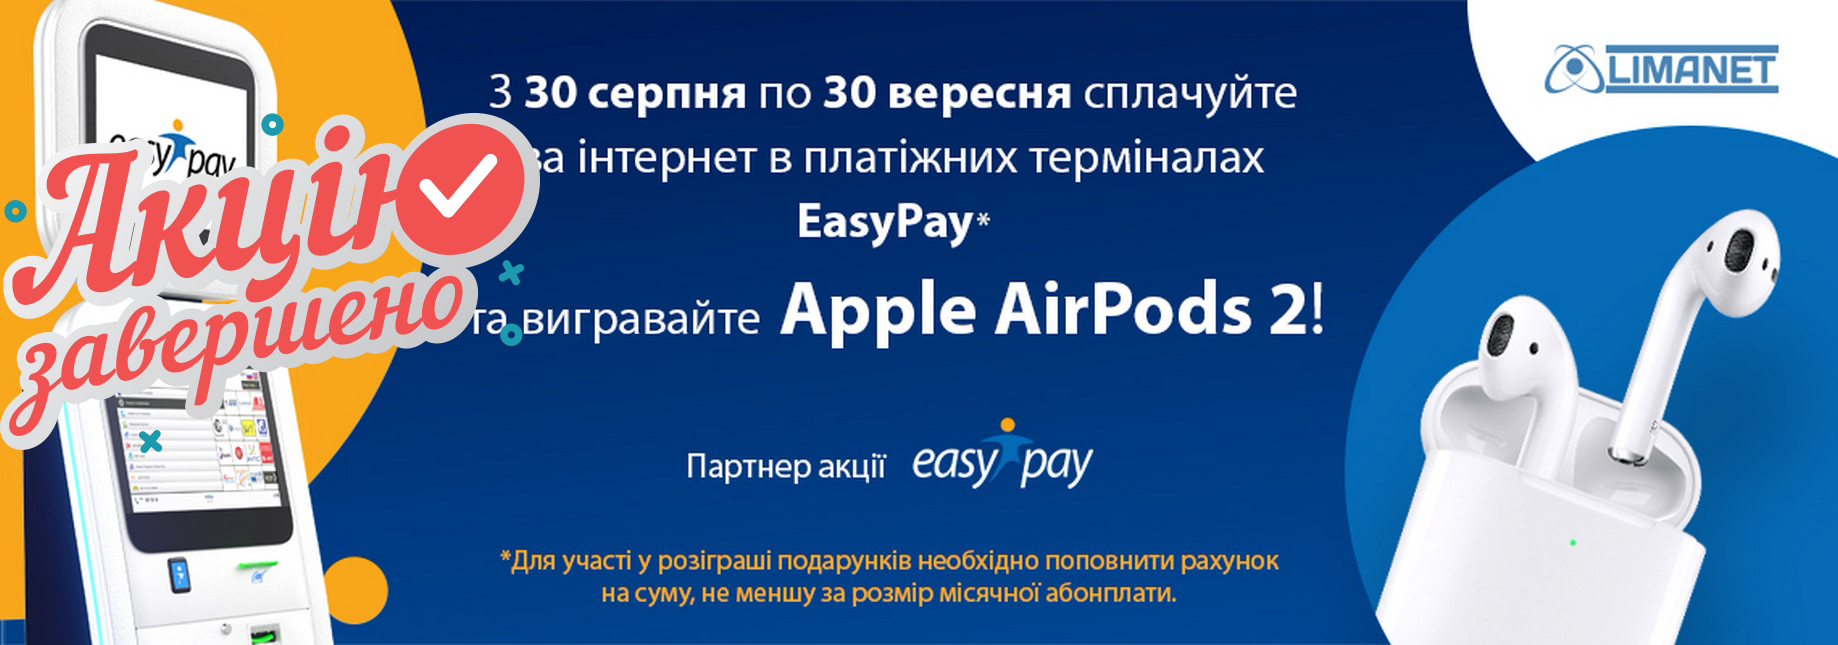 1 LimaNet AirPods2 1280х645 сor